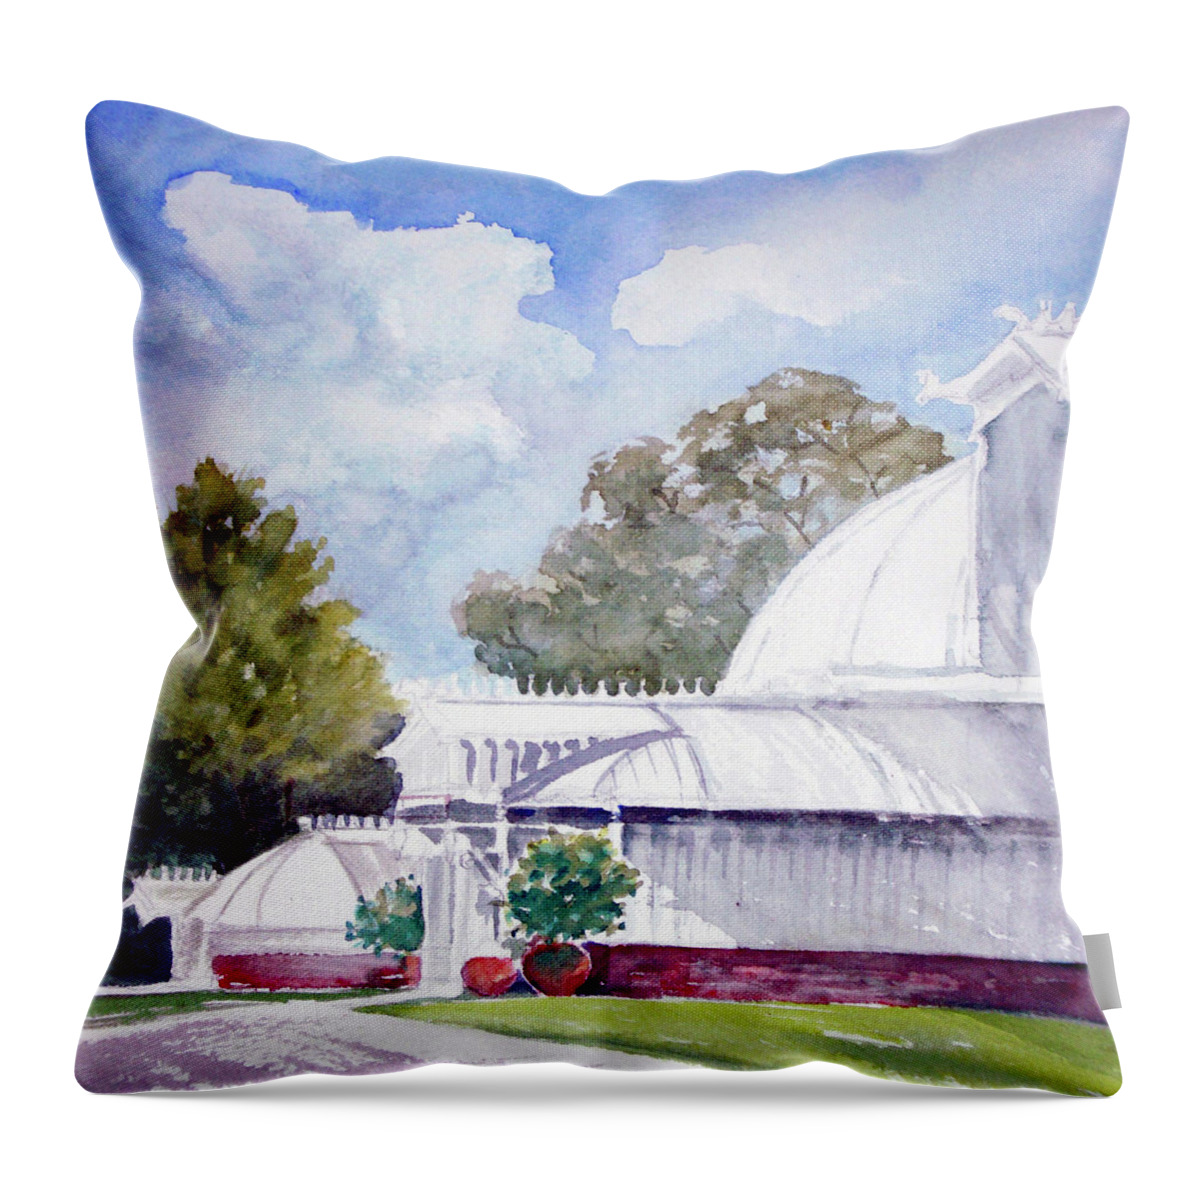 Golden Gate Park Throw Pillow featuring the mixed media Conservatory of Flowers by Karen Coggeshall